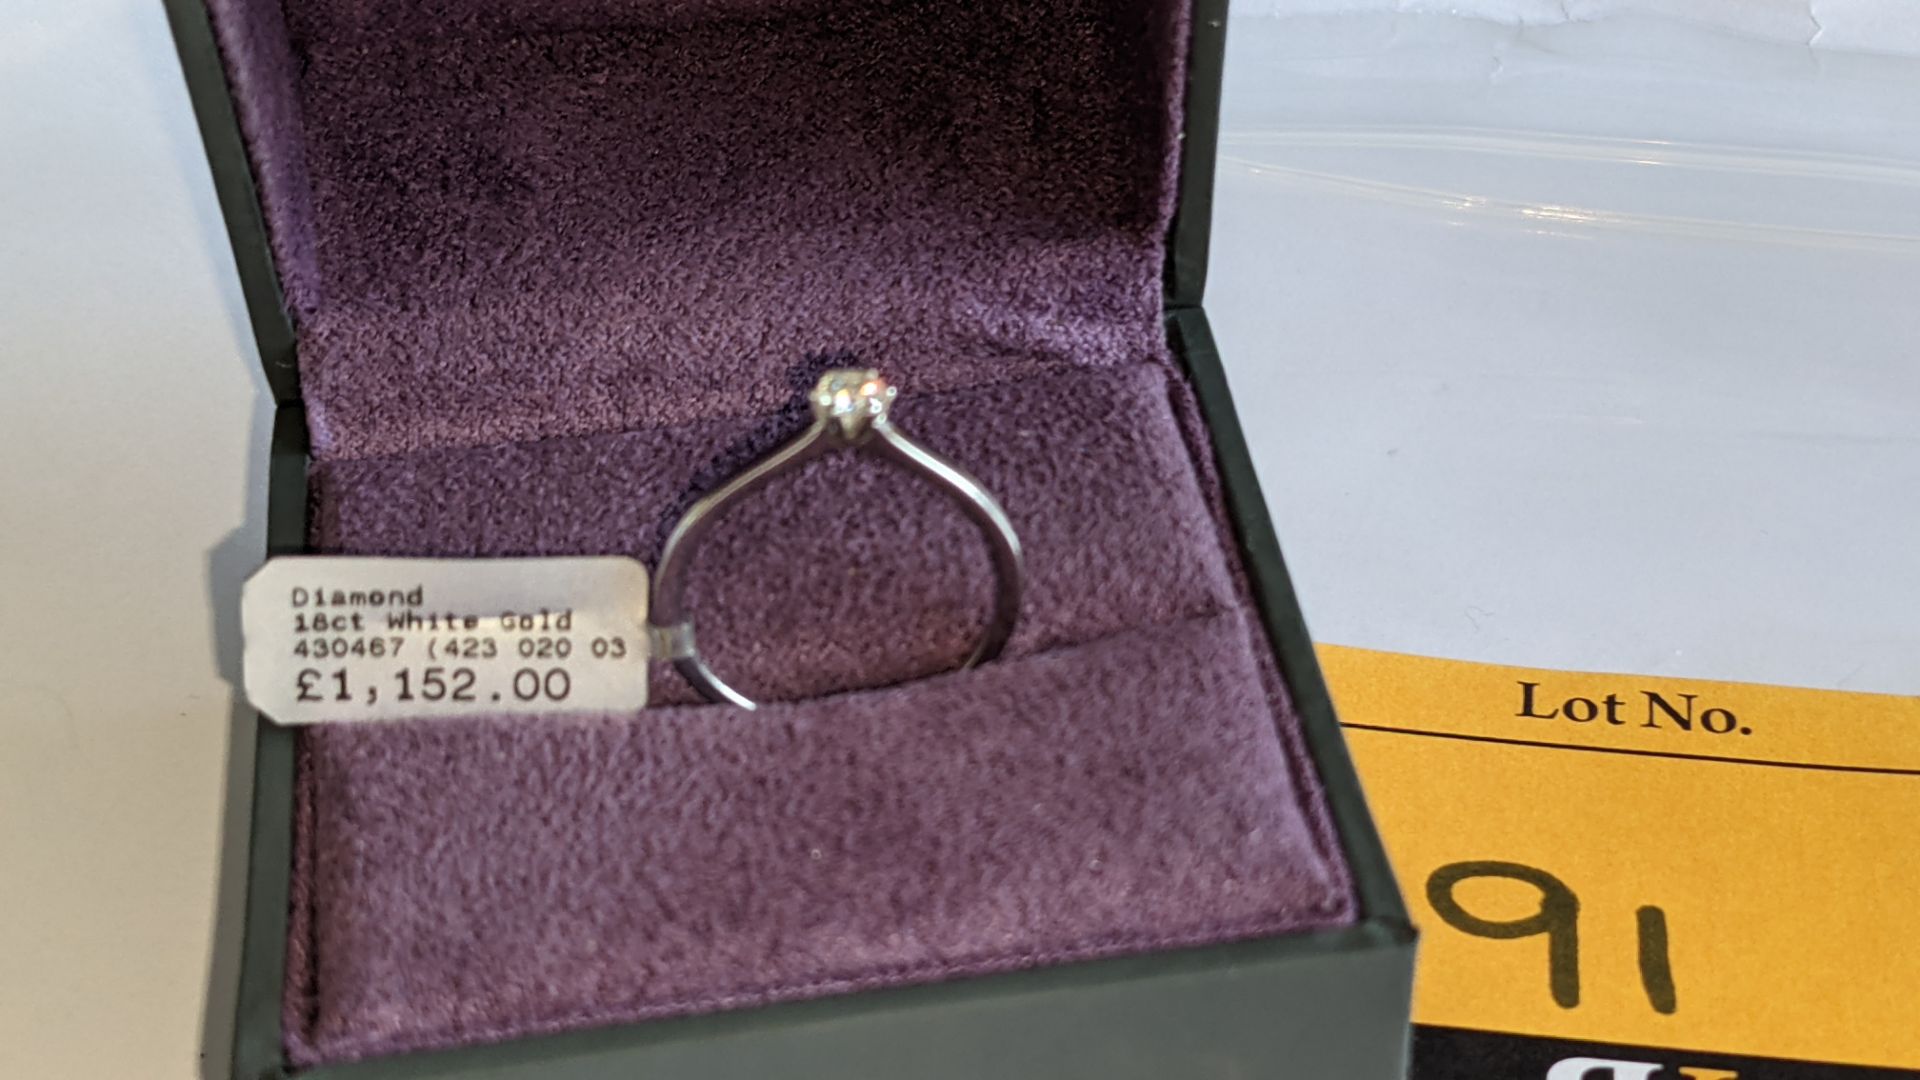 18ct white gold & diamond ring with 0.20ct G/Si brilliant cut diamond RRP £1,152 - Image 2 of 17